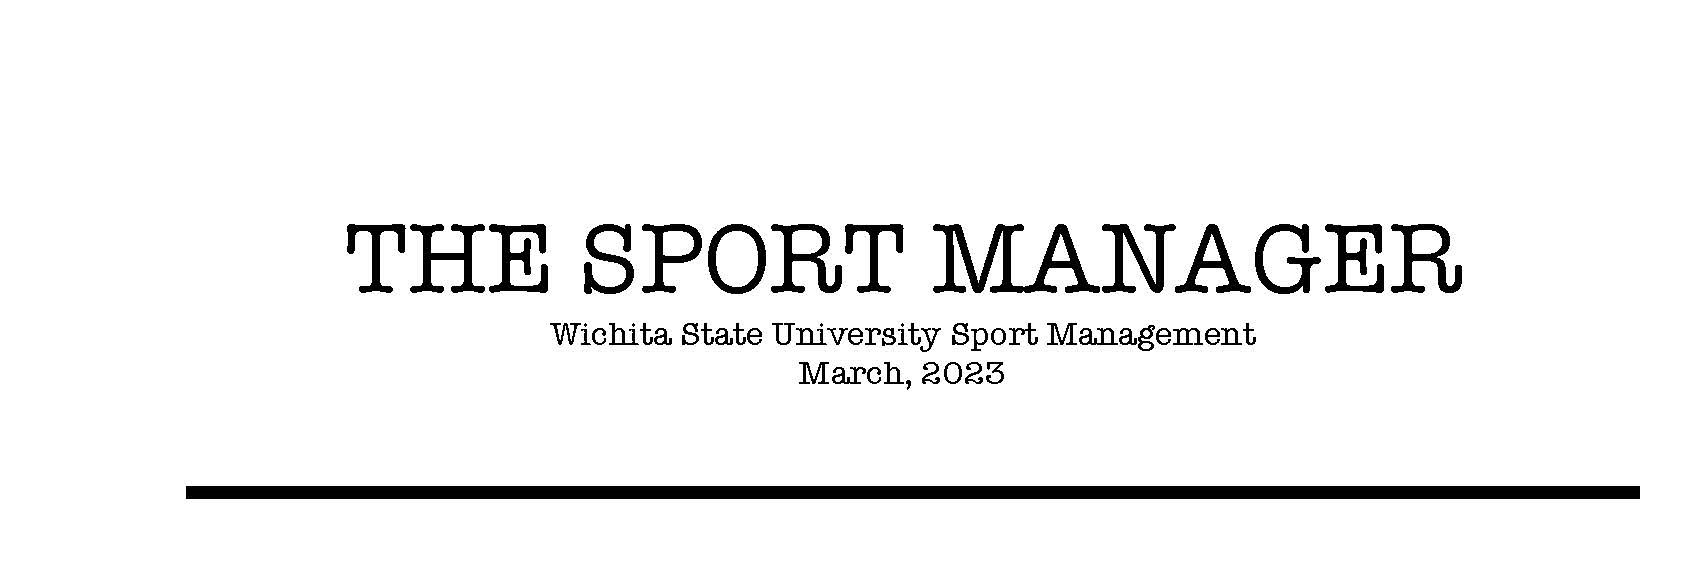 The Sport Manager: Wichita State University Sport Management newsletter, March 2023